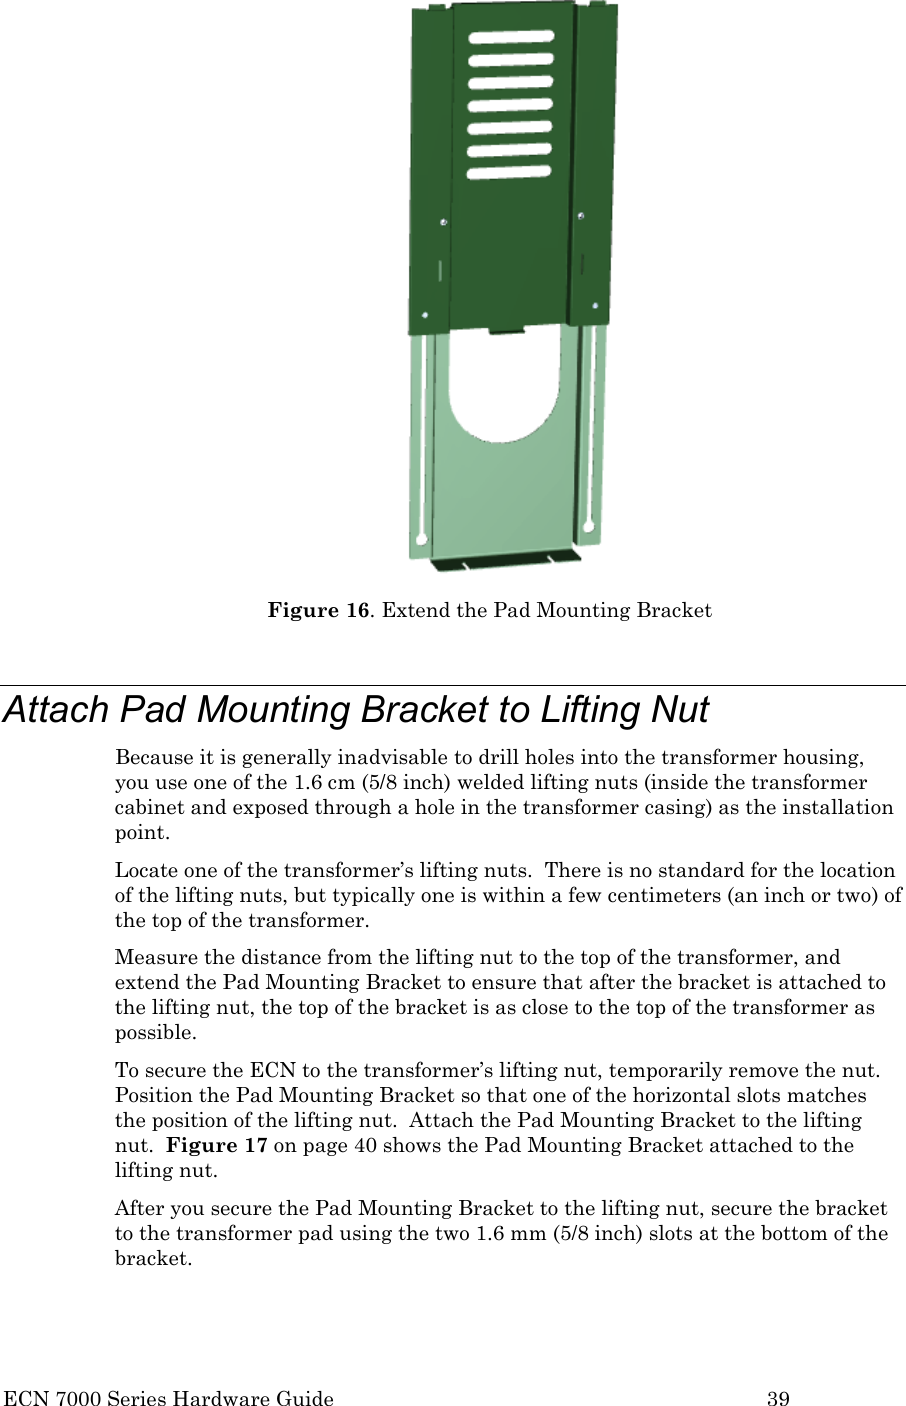  ECN 7000 Series Hardware Guide        39  Figure 16. Extend the Pad Mounting Bracket  Attach Pad Mounting Bracket to Lifting Nut Because it is generally inadvisable to drill holes into the transformer housing, you use one of the 1.6 cm (5/8 inch) welded lifting nuts (inside the transformer cabinet and exposed through a hole in the transformer casing) as the installation point. Locate one of the transformer’s lifting nuts.  There is no standard for the location of the lifting nuts, but typically one is within a few centimeters (an inch or two) of the top of the transformer.   Measure the distance from the lifting nut to the top of the transformer, and extend the Pad Mounting Bracket to ensure that after the bracket is attached to the lifting nut, the top of the bracket is as close to the top of the transformer as possible.  To secure the ECN to the transformer’s lifting nut, temporarily remove the nut.  Position the Pad Mounting Bracket so that one of the horizontal slots matches the position of the lifting nut.  Attach the Pad Mounting Bracket to the lifting nut.  Figure 17 on page 40 shows the Pad Mounting Bracket attached to the lifting nut. After you secure the Pad Mounting Bracket to the lifting nut, secure the bracket to the transformer pad using the two 1.6 mm (5/8 inch) slots at the bottom of the bracket.    